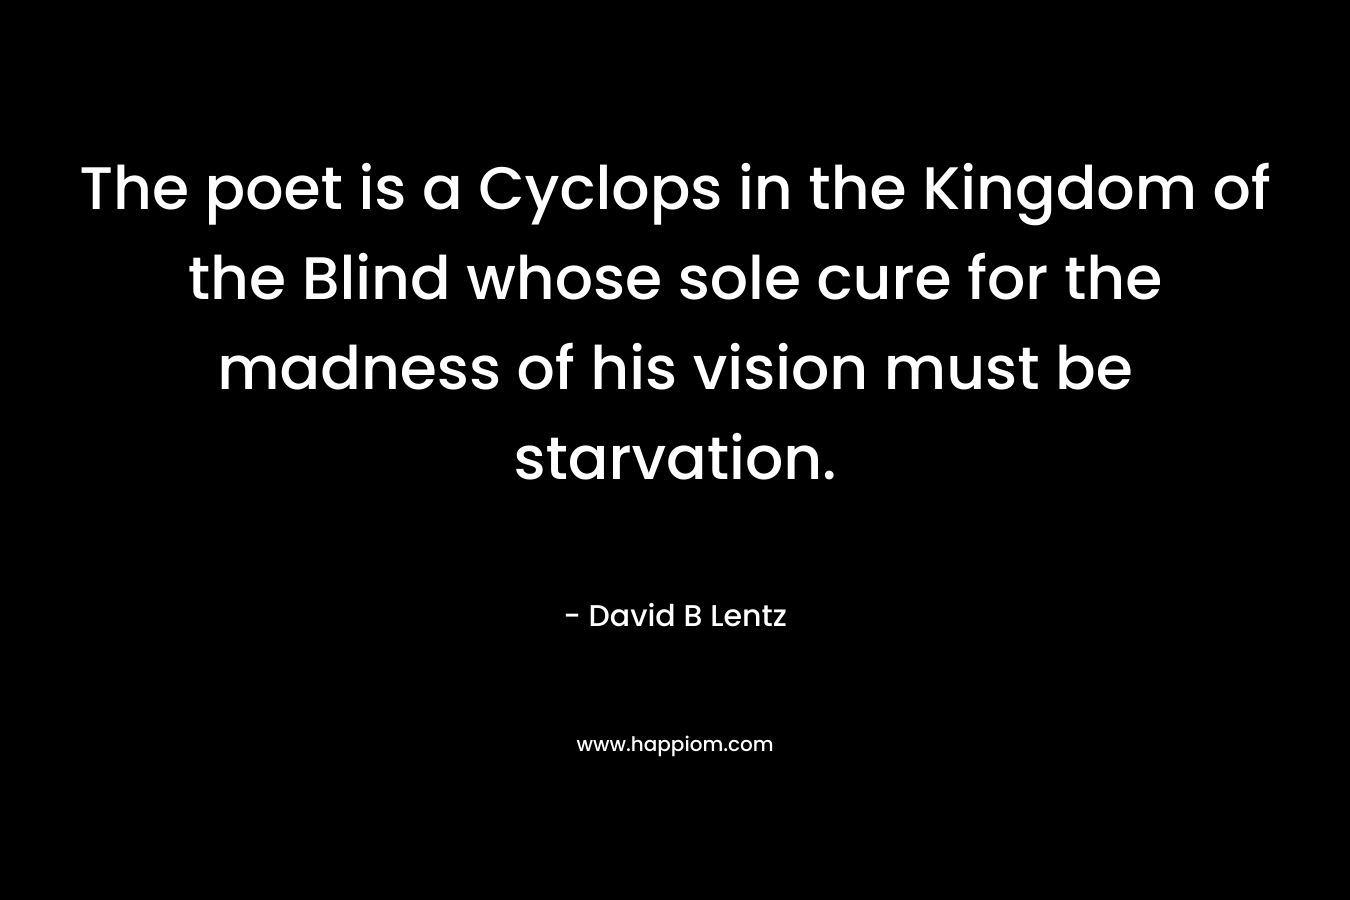 The poet is a Cyclops in the Kingdom of the Blind whose sole cure for the madness of his vision must be starvation.